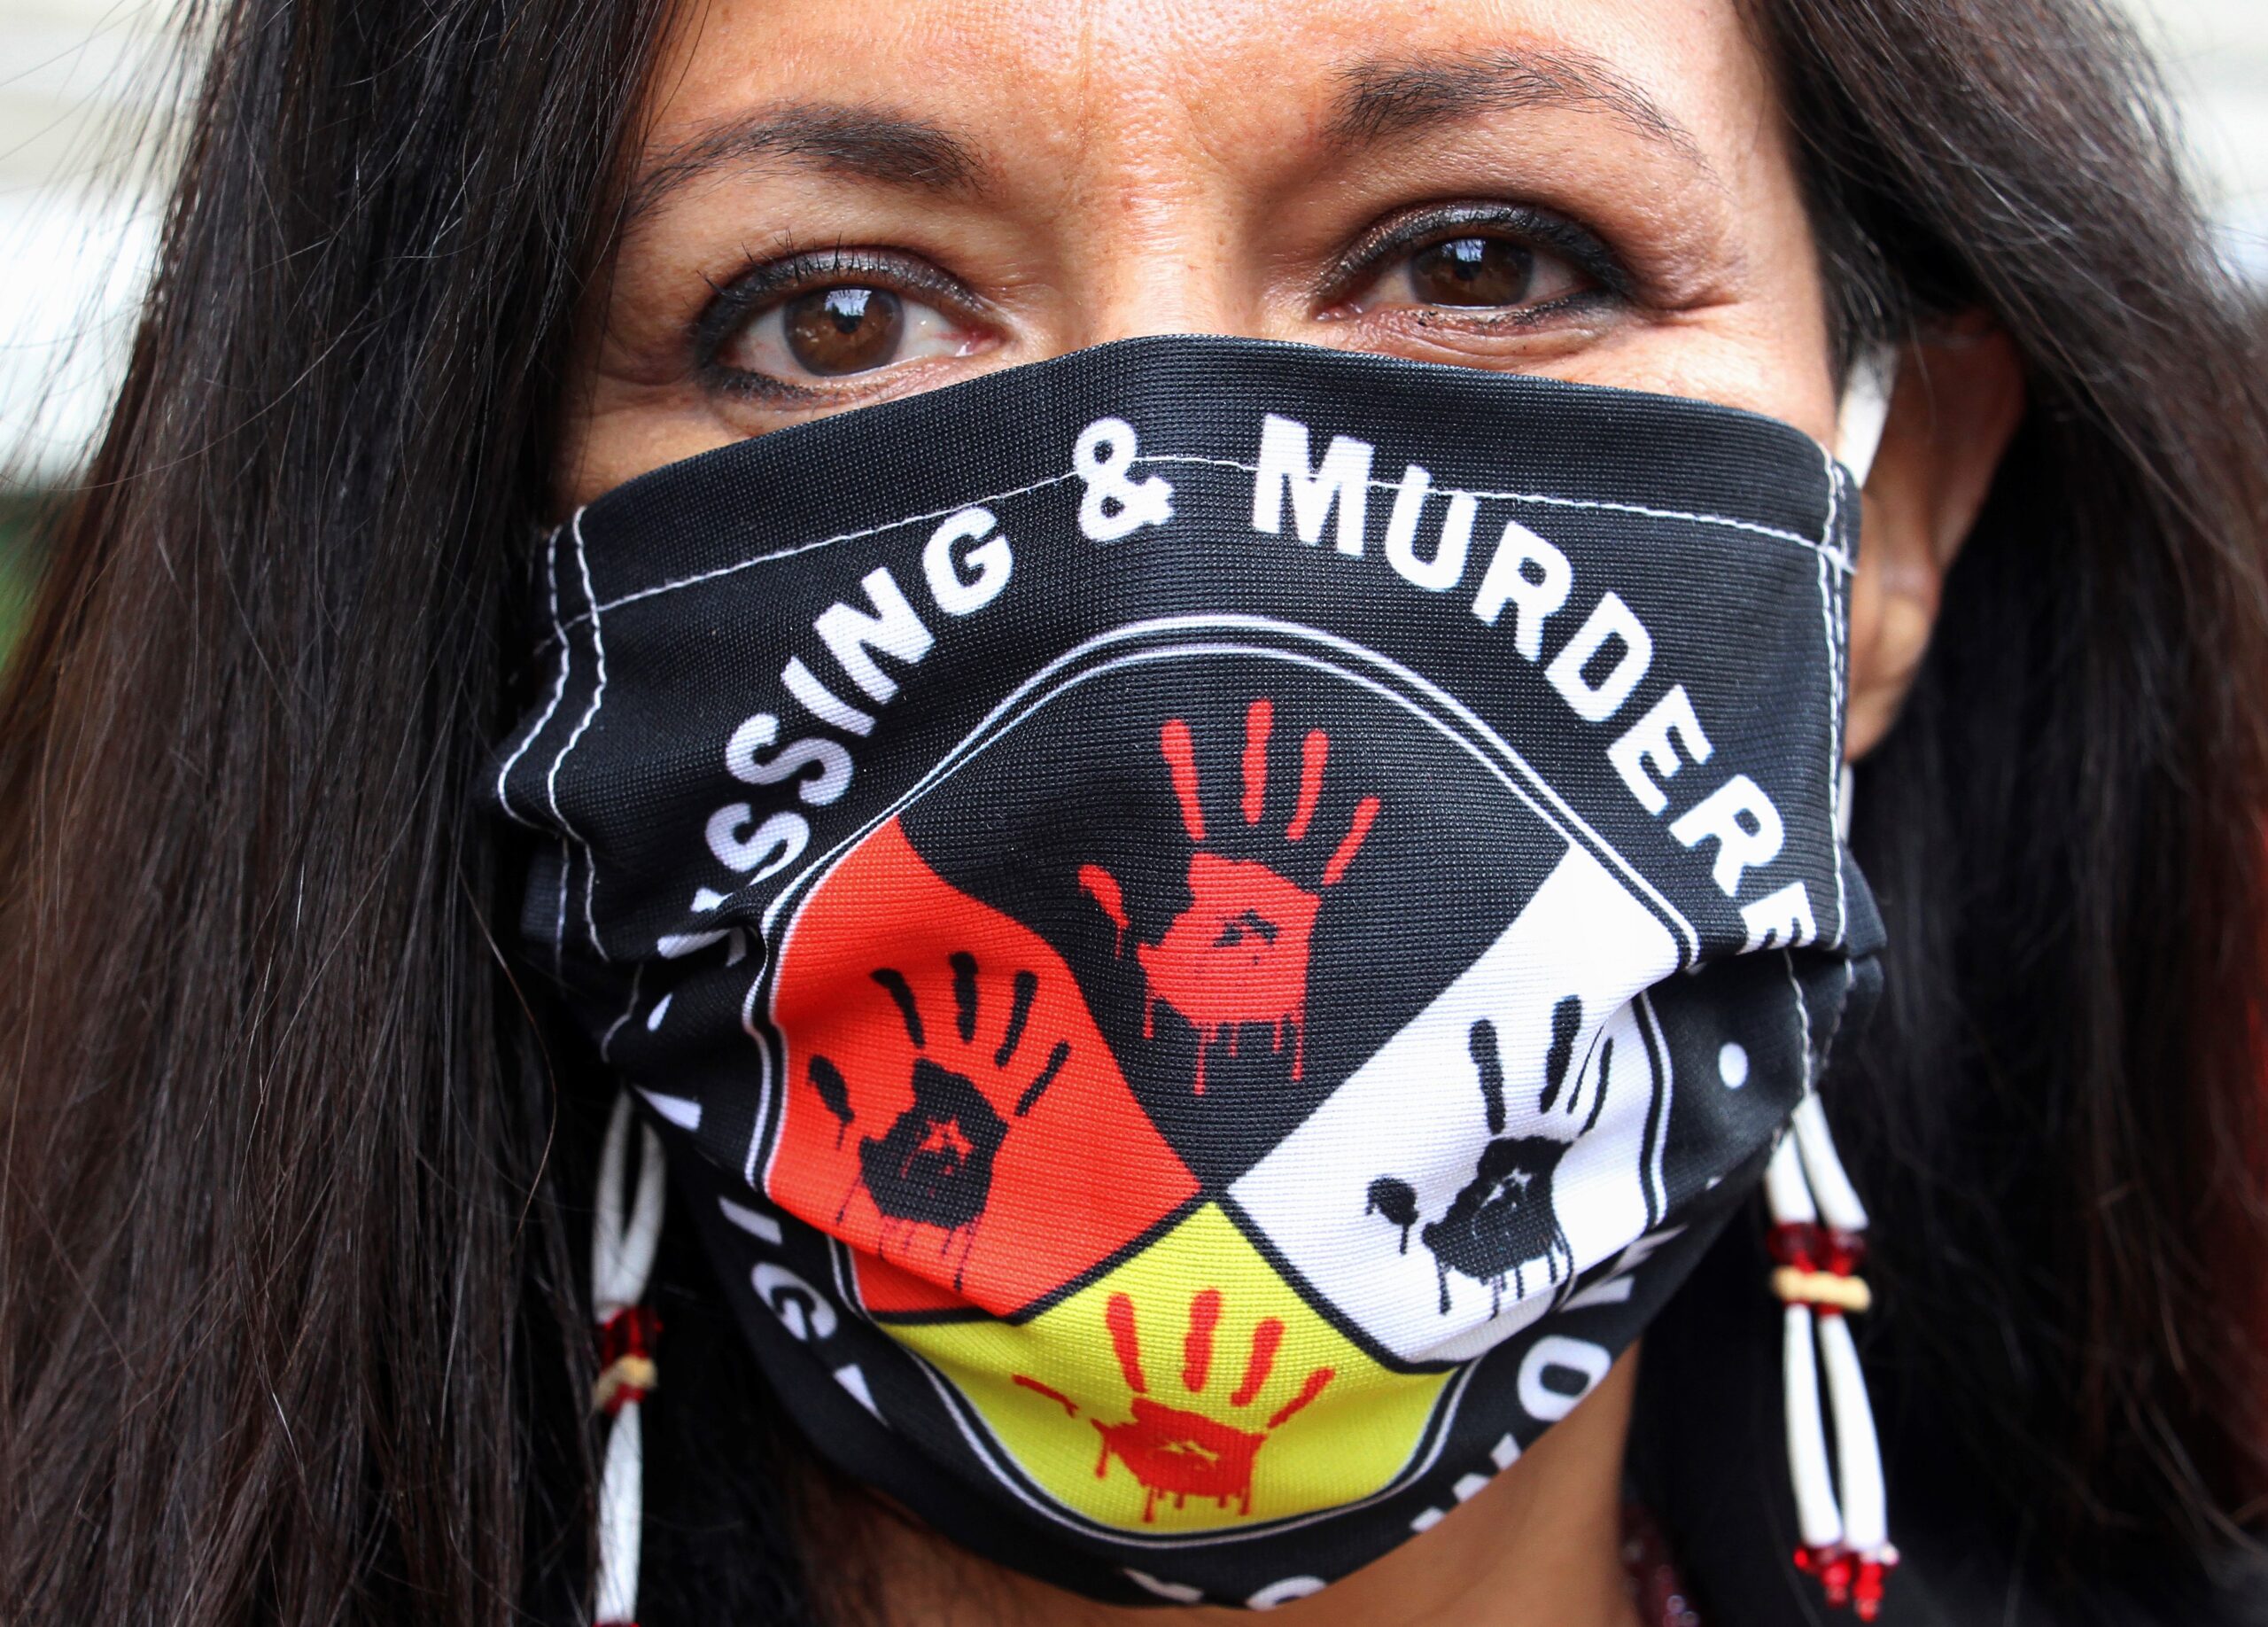 Native American leaders, Wisconsin AG hope executive order sends more resources to address missing and murdered Indigenous women